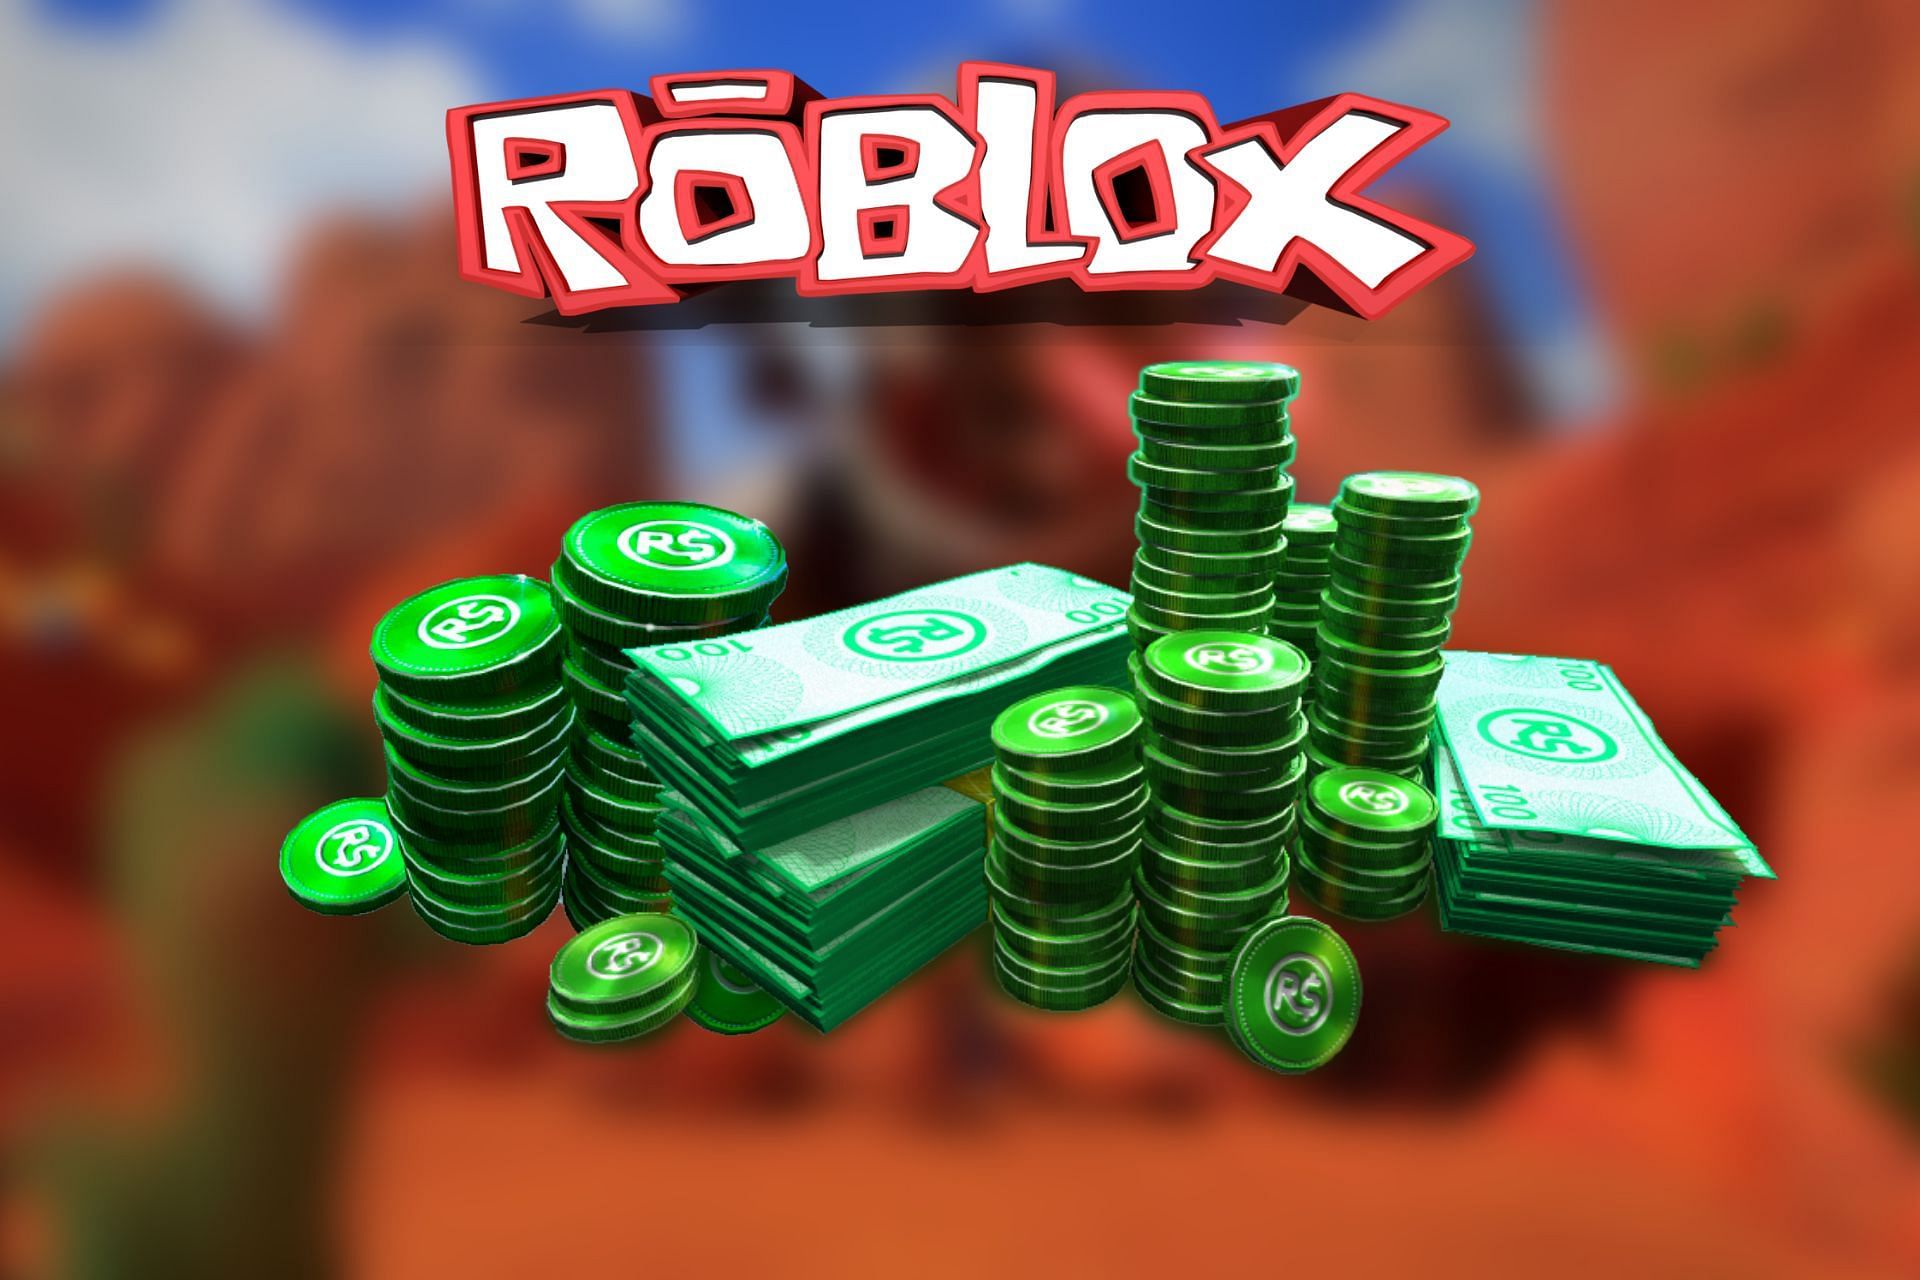 if the amount of cash you have was converted to robux, how much